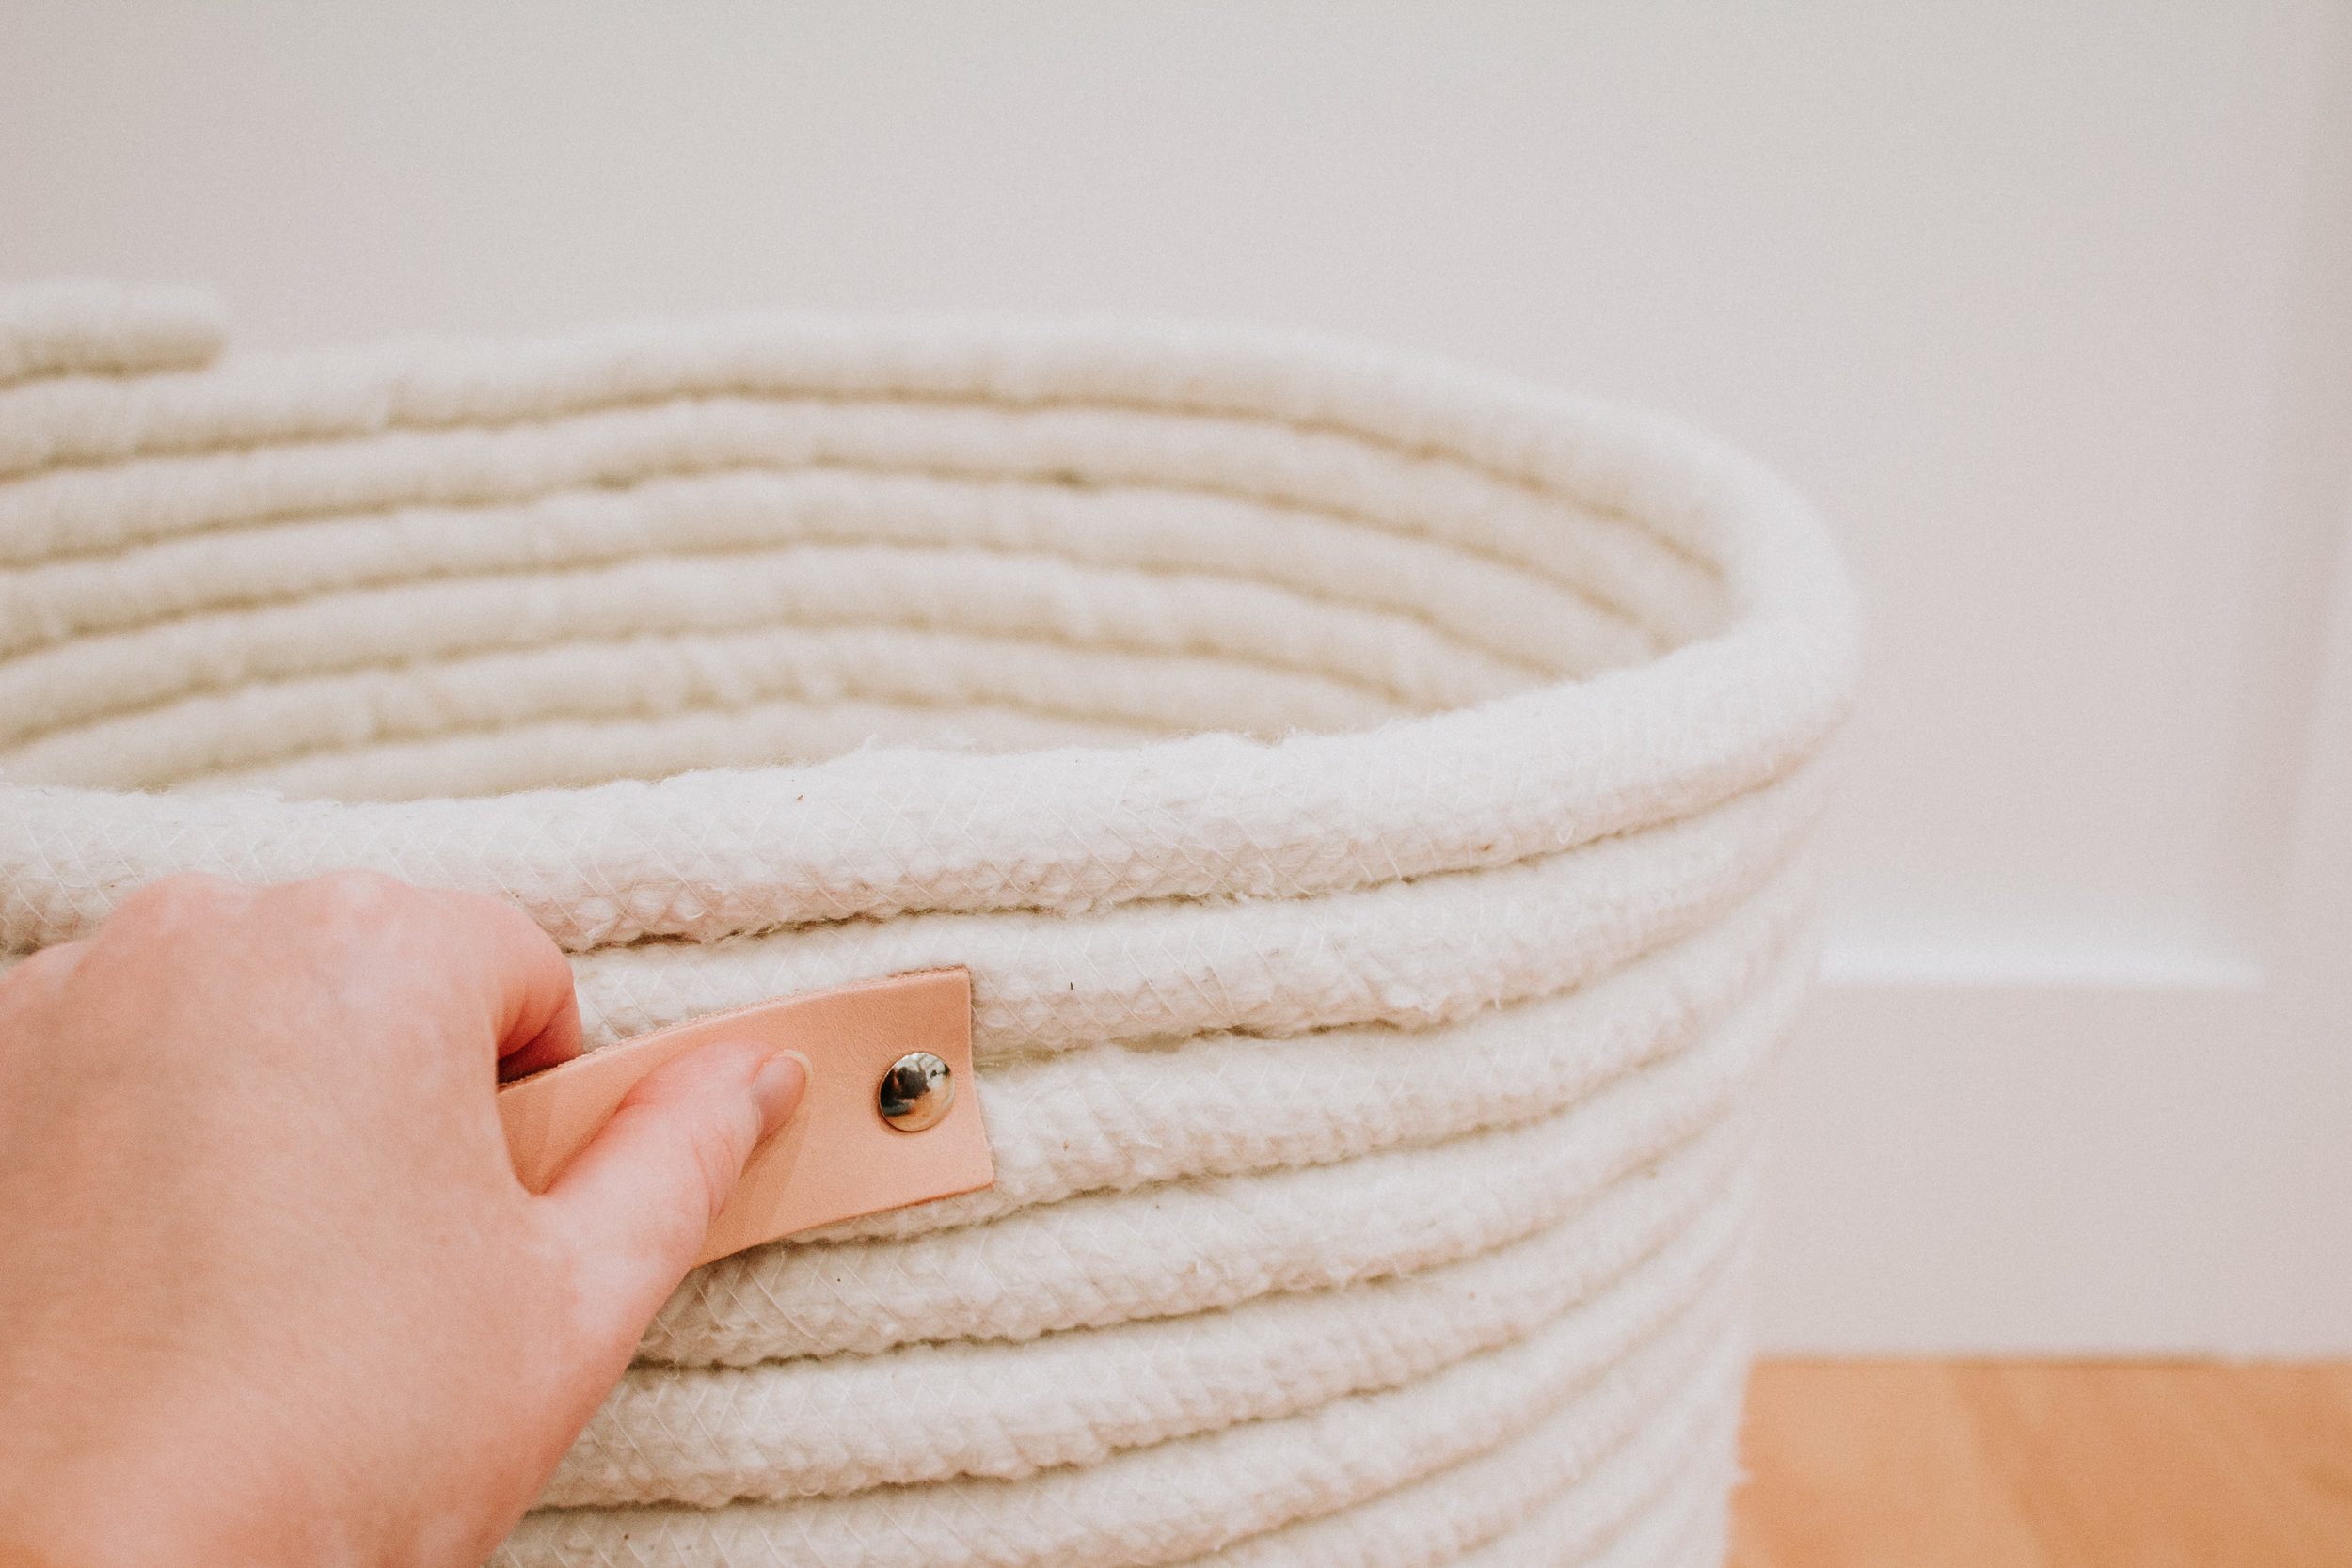 DIY No Sew Rope Basket - Easiest DIY project ever! - use as a throw blanket basket or storage tote - rope basket with leather handles